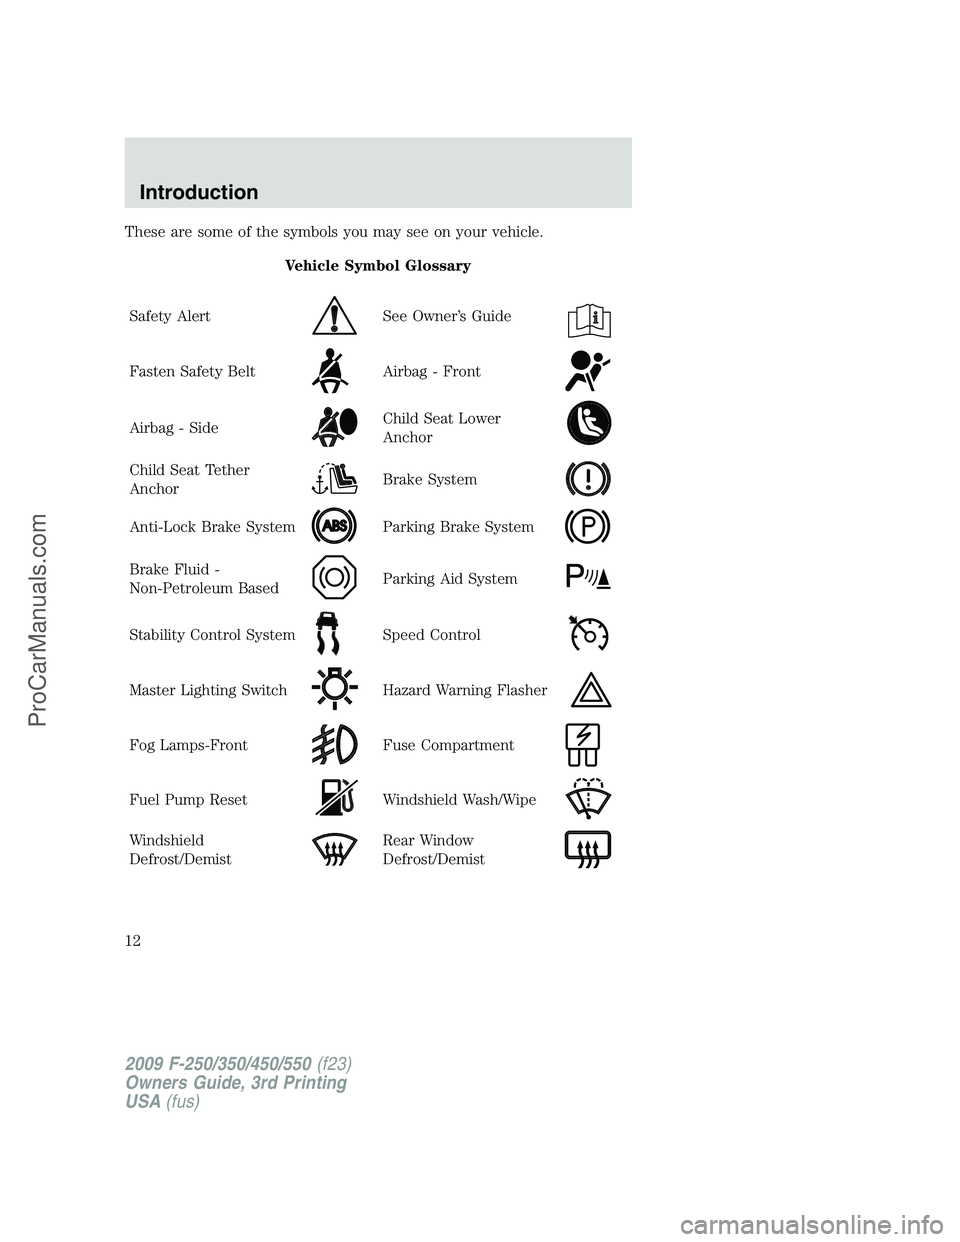 FORD F350 2009  Owners Manual These are some of the symbols you may see on your vehicle.
Vehicle Symbol Glossary
Safety Alert
See Owner’s Guide
Fasten Safety BeltAirbag - Front
Airbag - SideChild Seat Lower
Anchor
Child Seat Tet